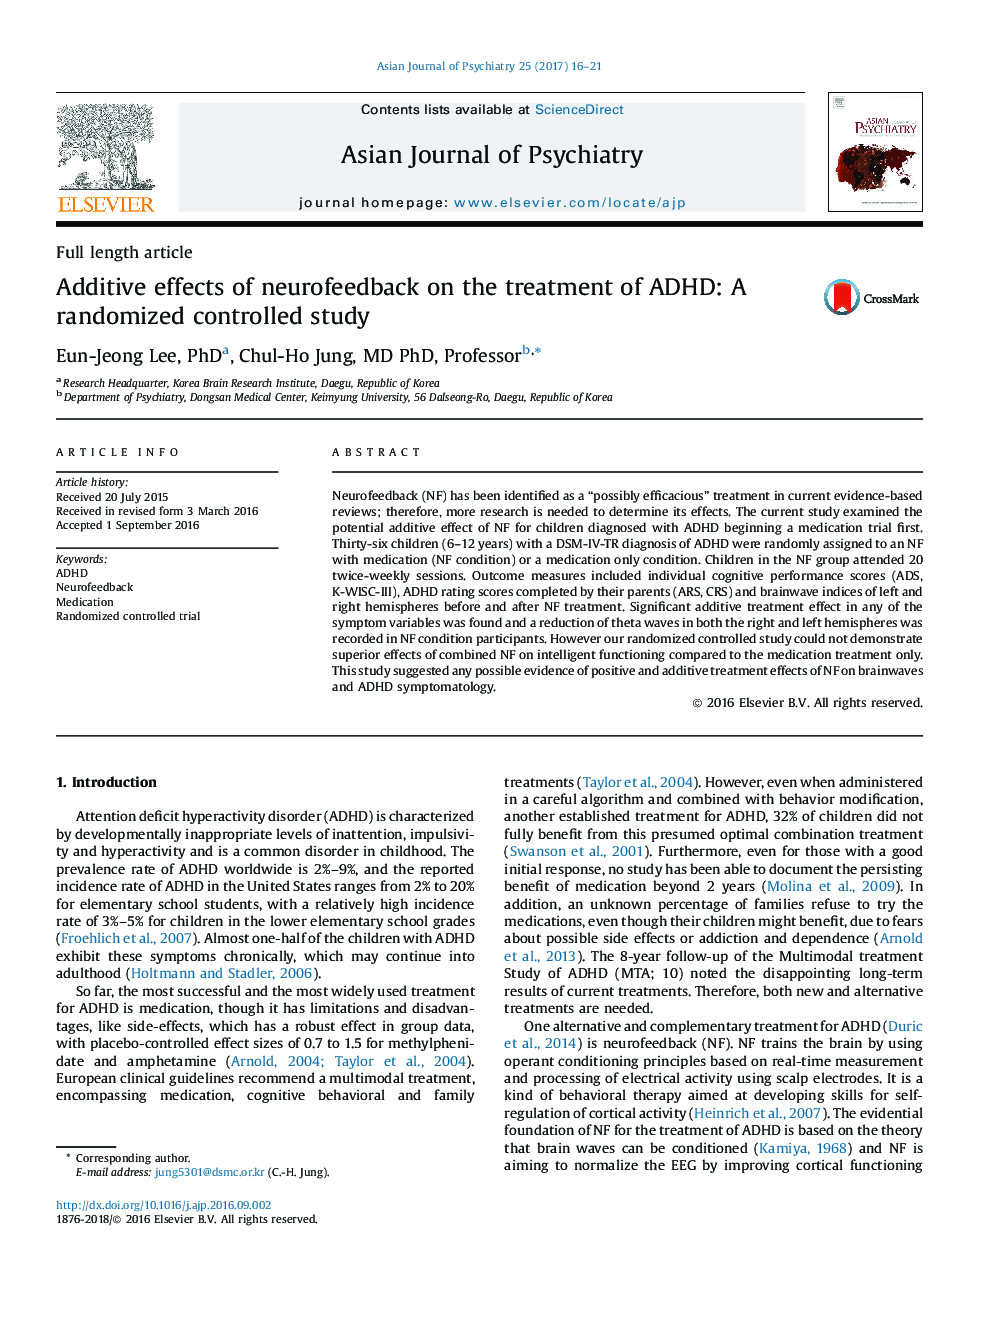 Additive effects of neurofeedback on the treatment of ADHD: A randomized controlled study